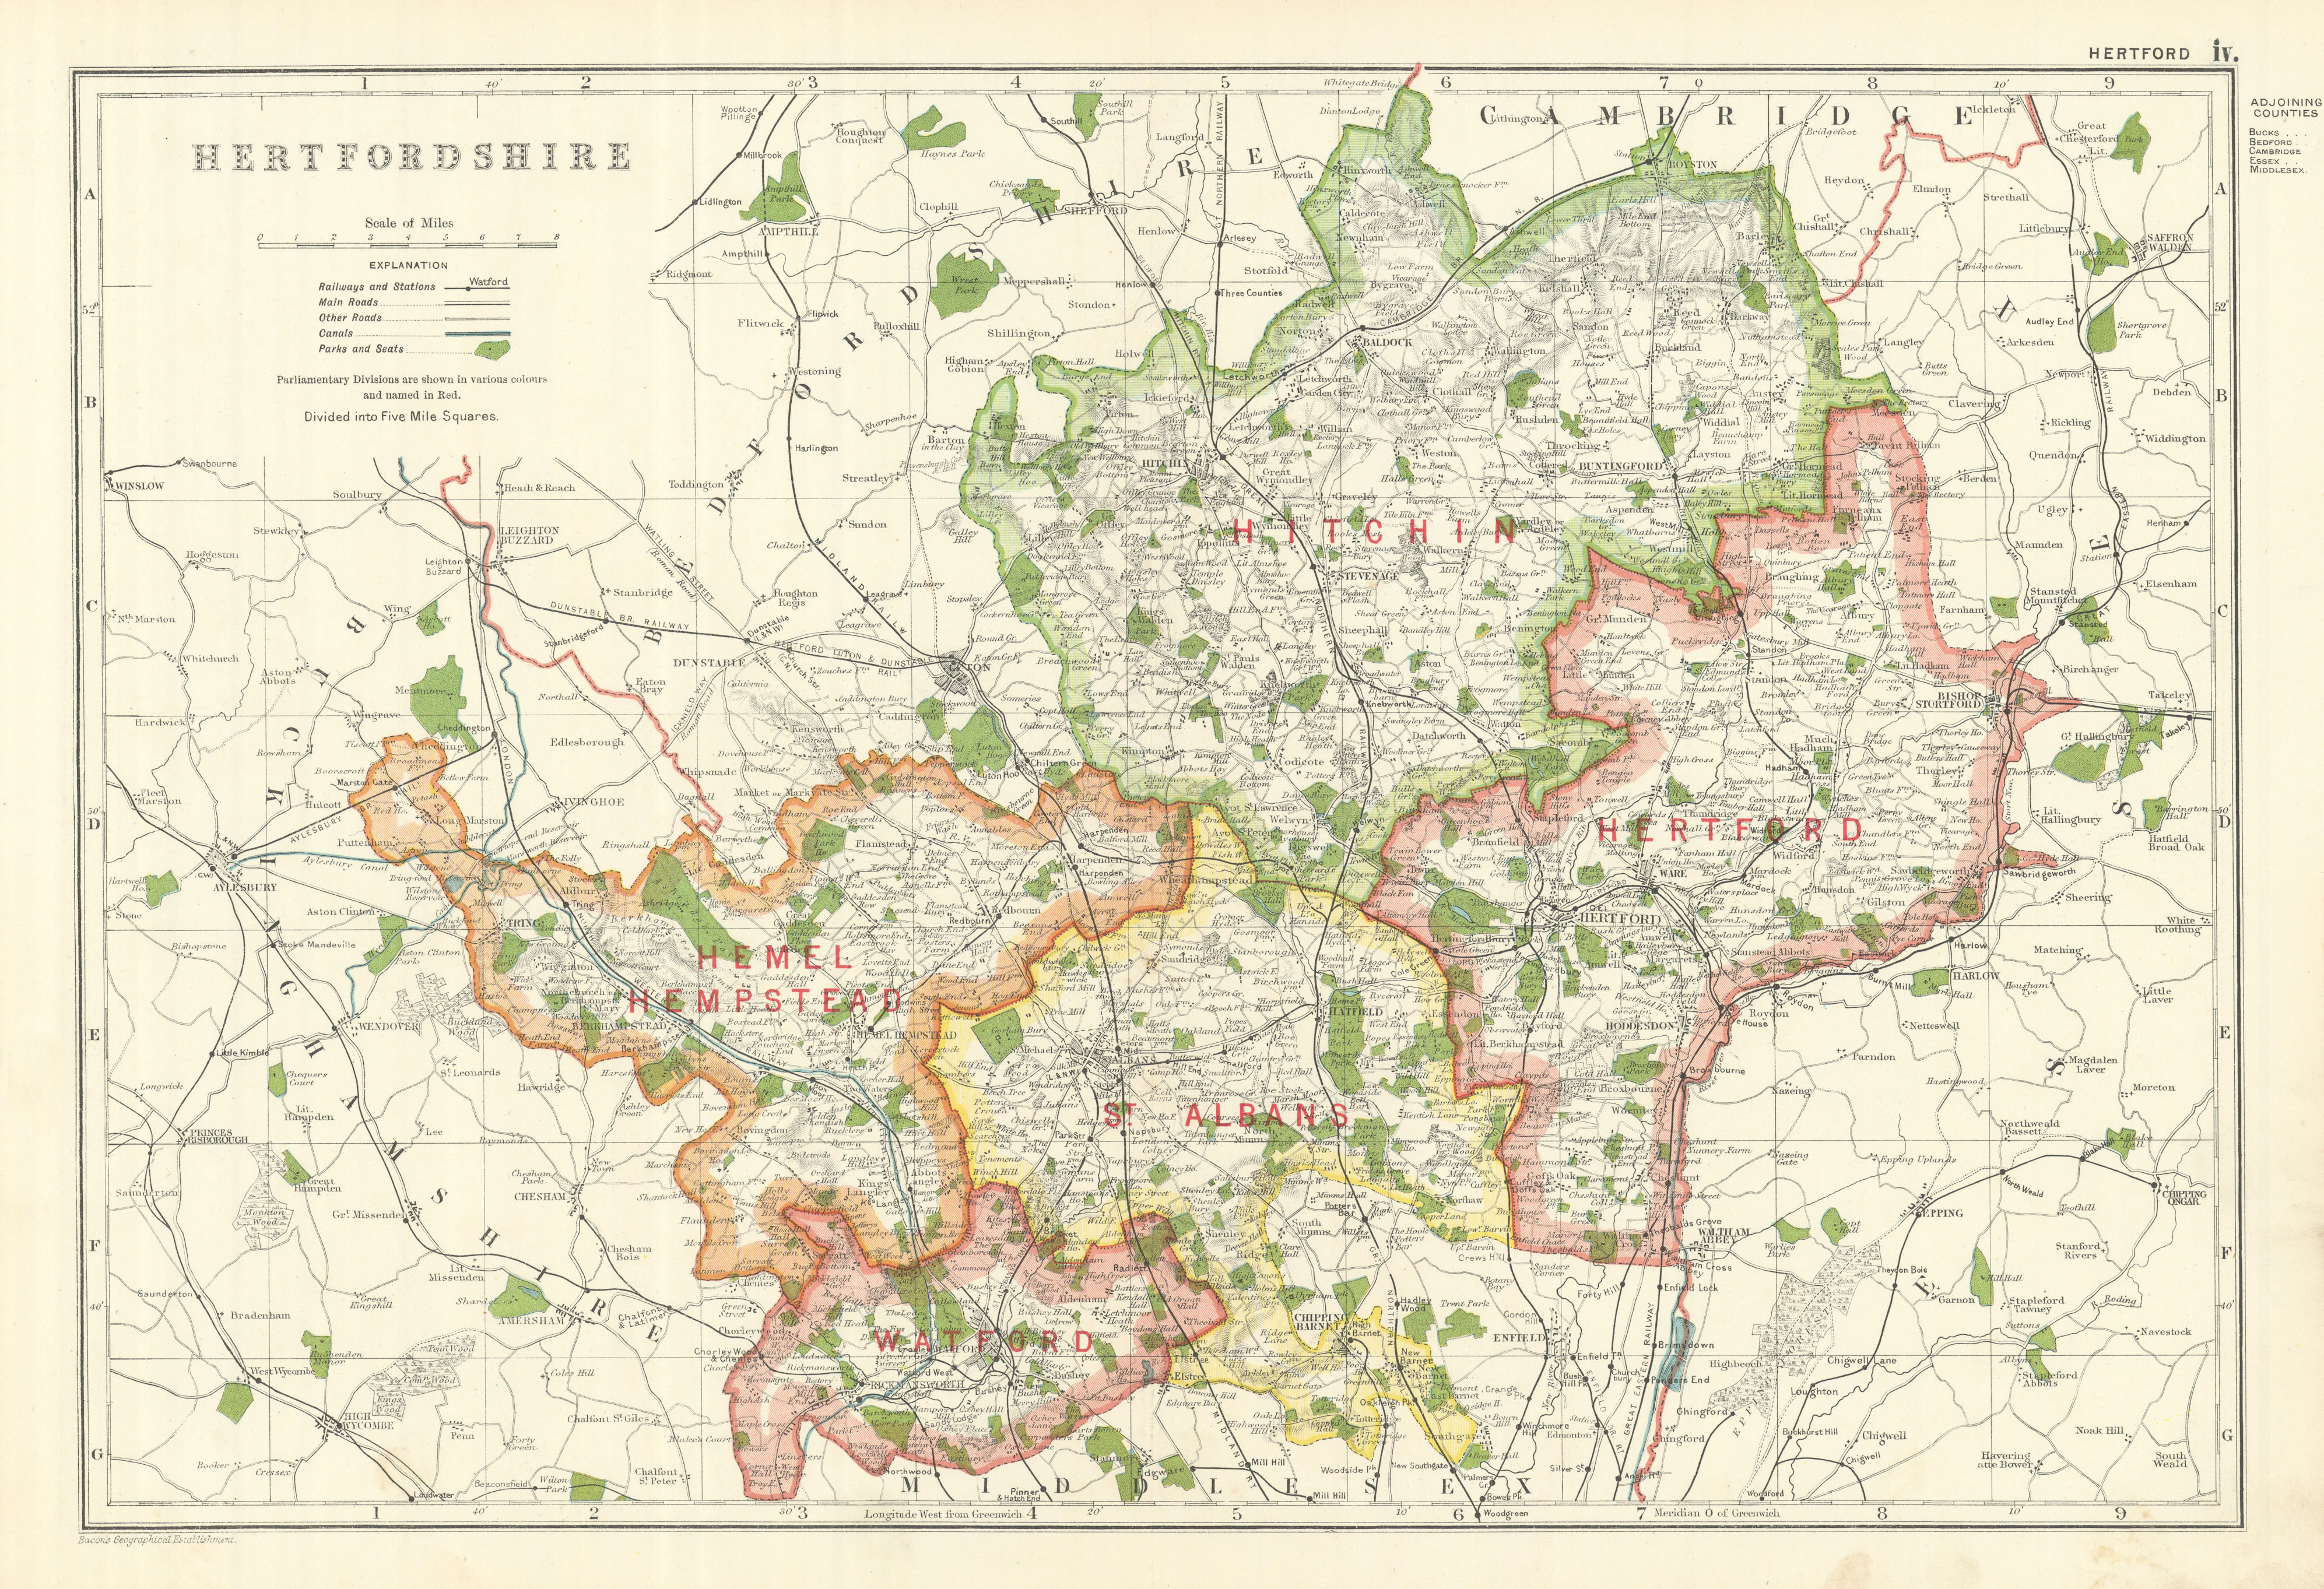 Associate Product HERTFORDSHIRE. Showing Parliamentary divisions, boroughs & parks. BACON 1919 map